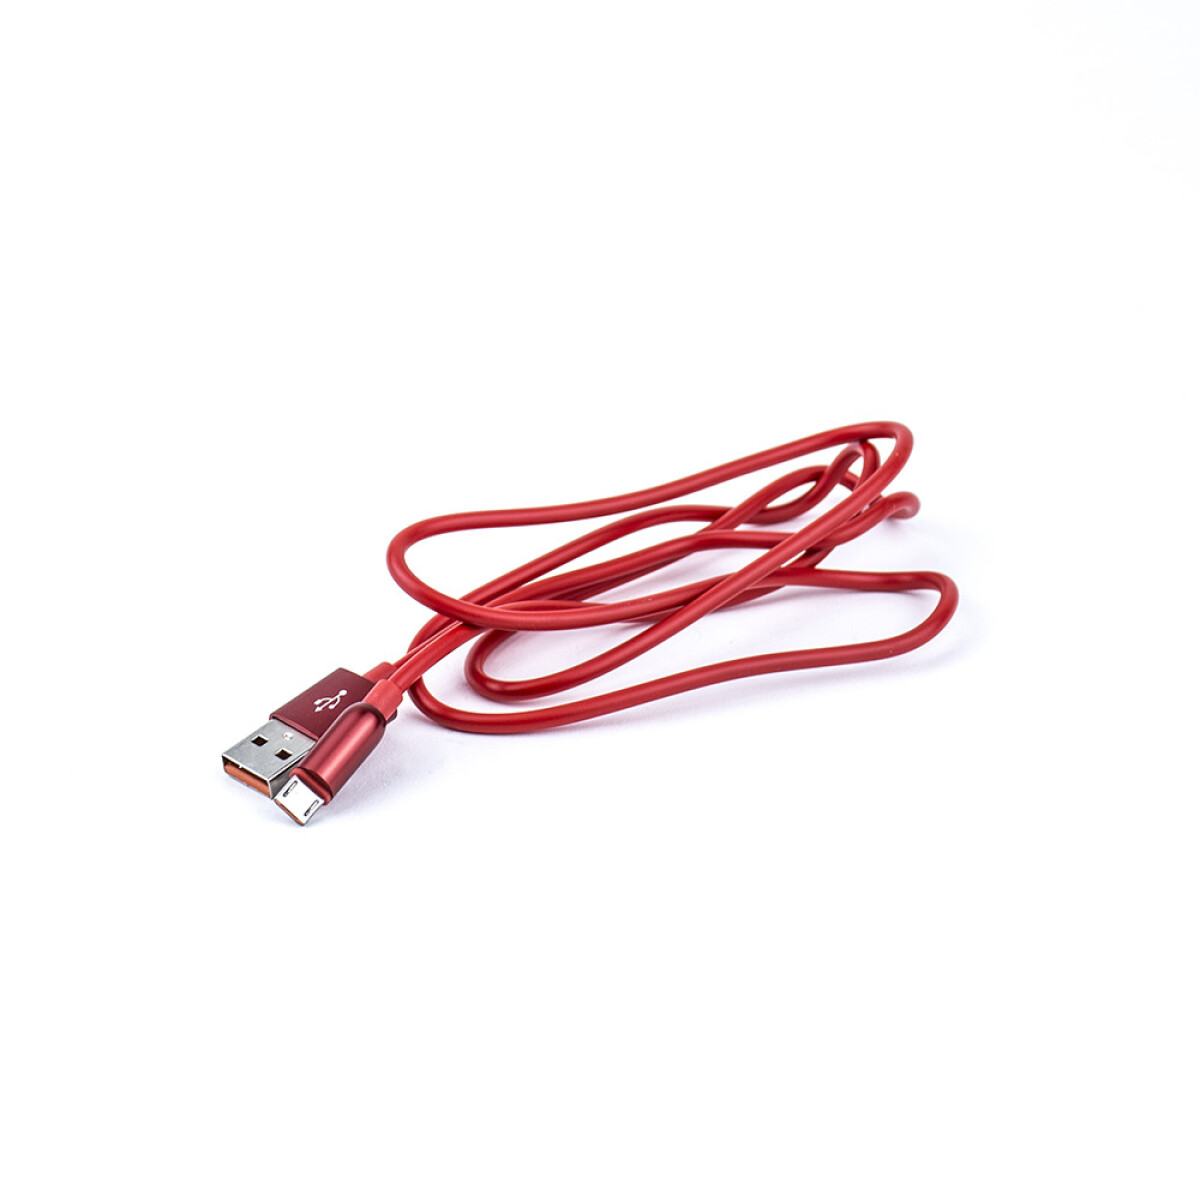 Cable Usb Android En Tubo - Rojo 